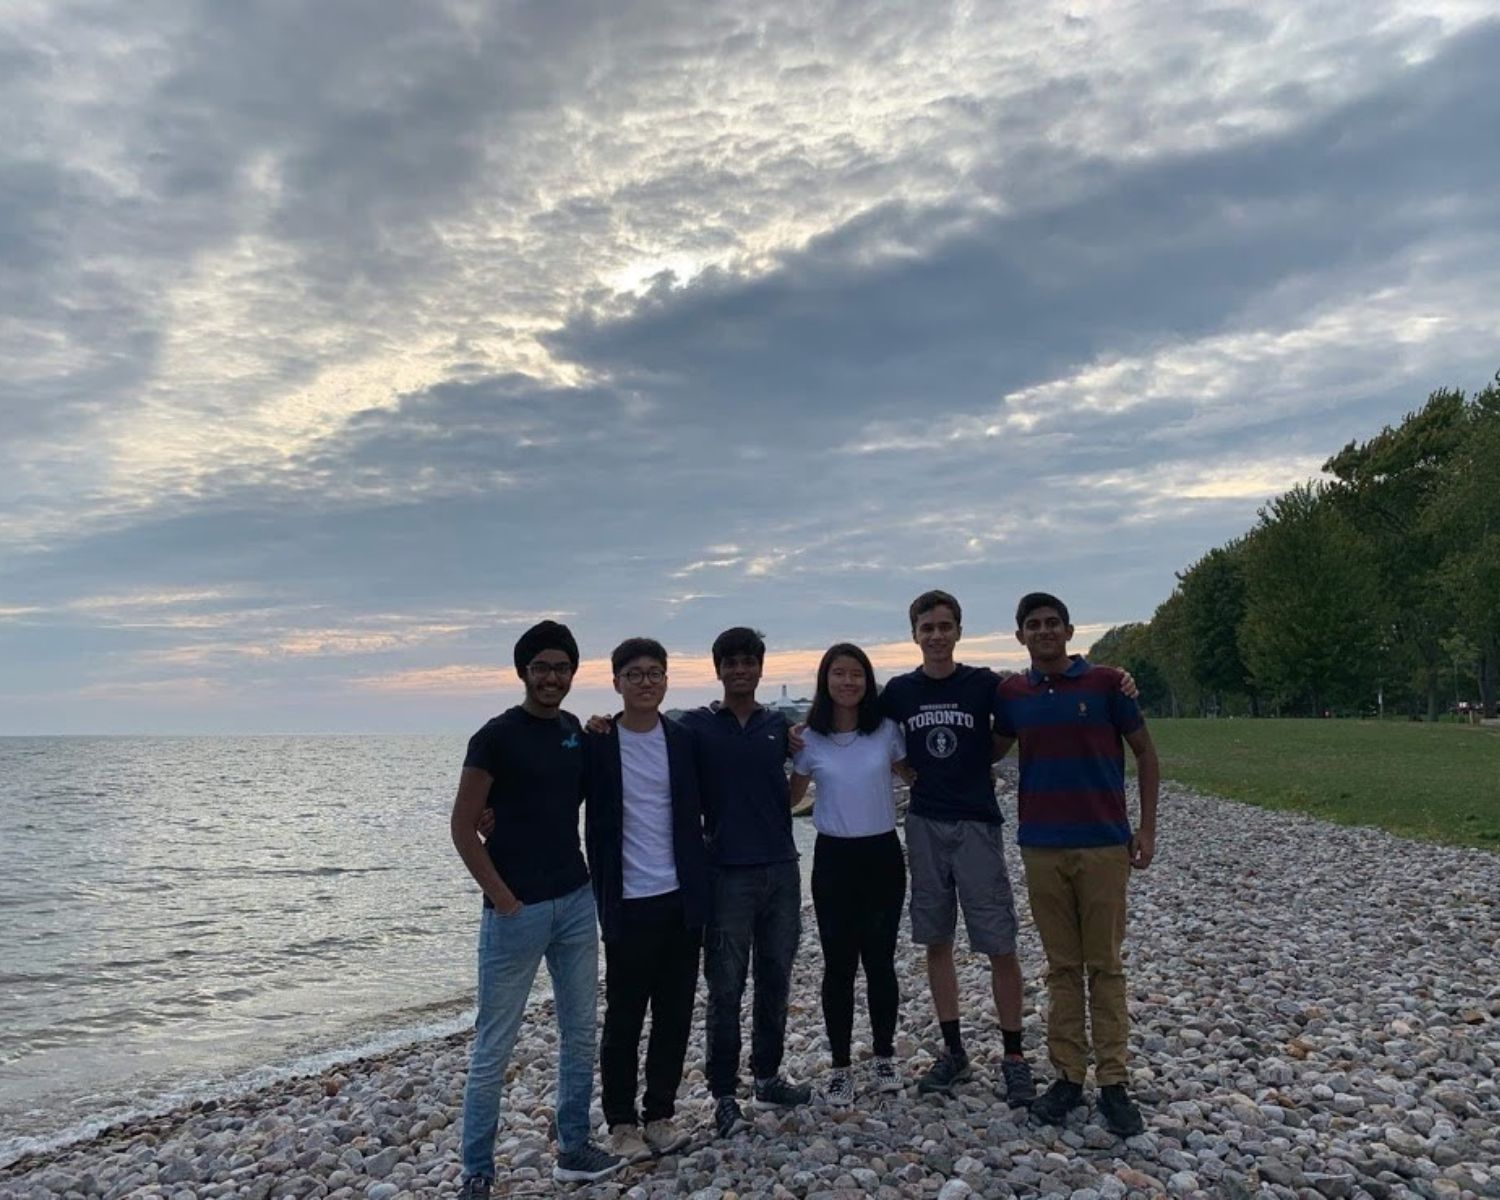 A group of smiling students standing outside on a rocky beach.